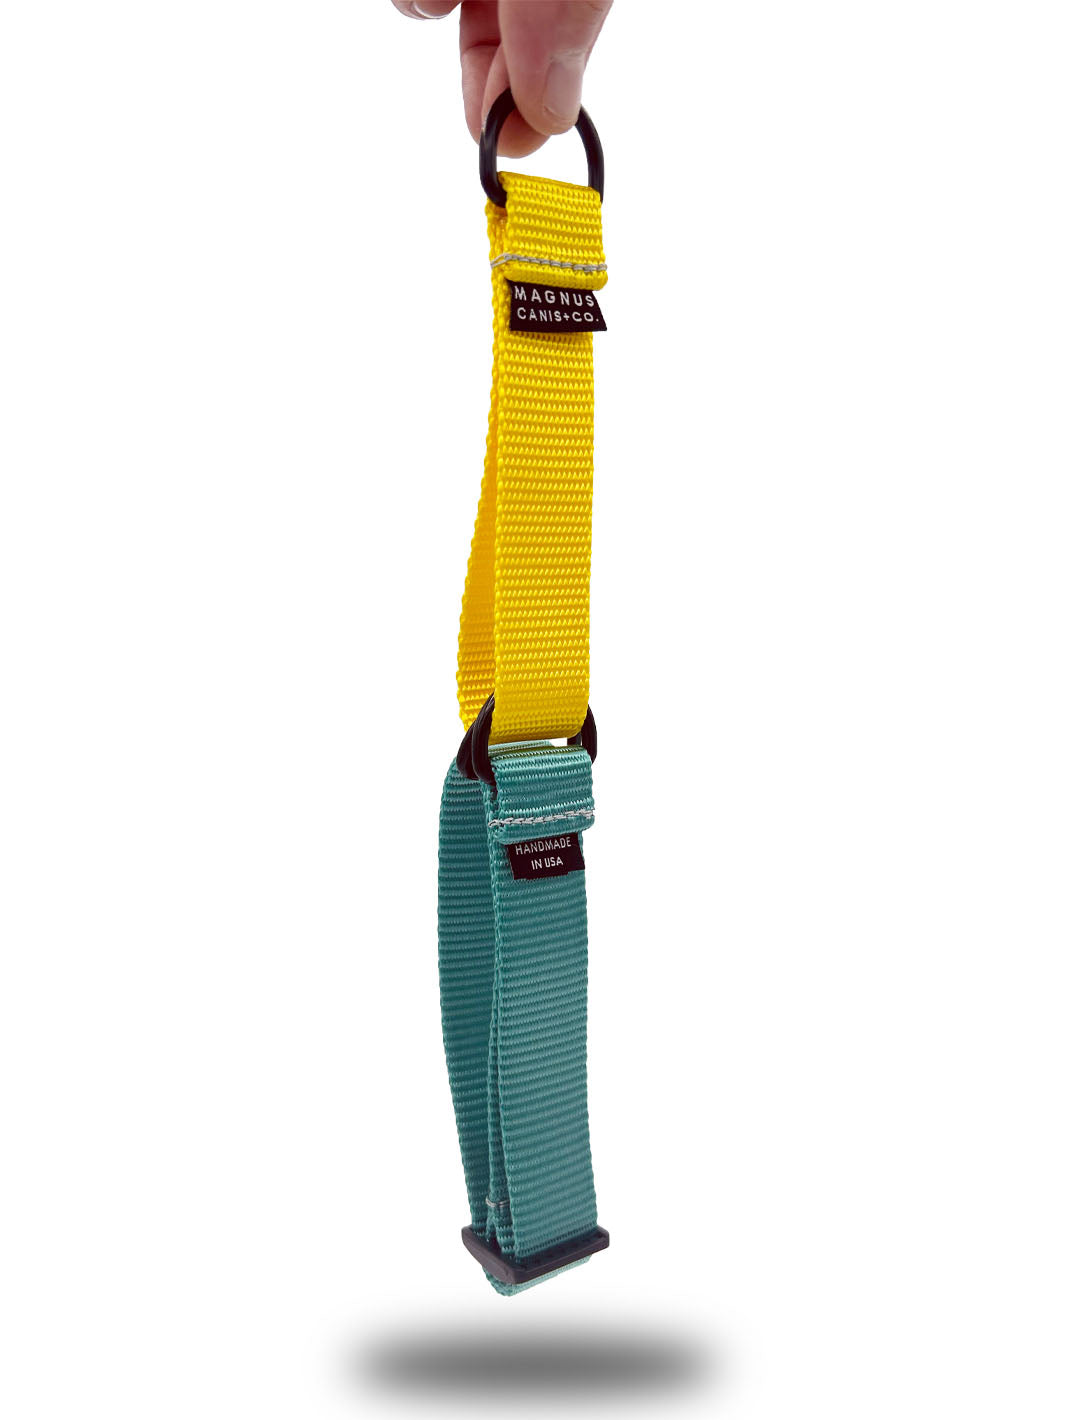 Light teal and yellow nylon martingale dog collar by MAGNUS Canis.